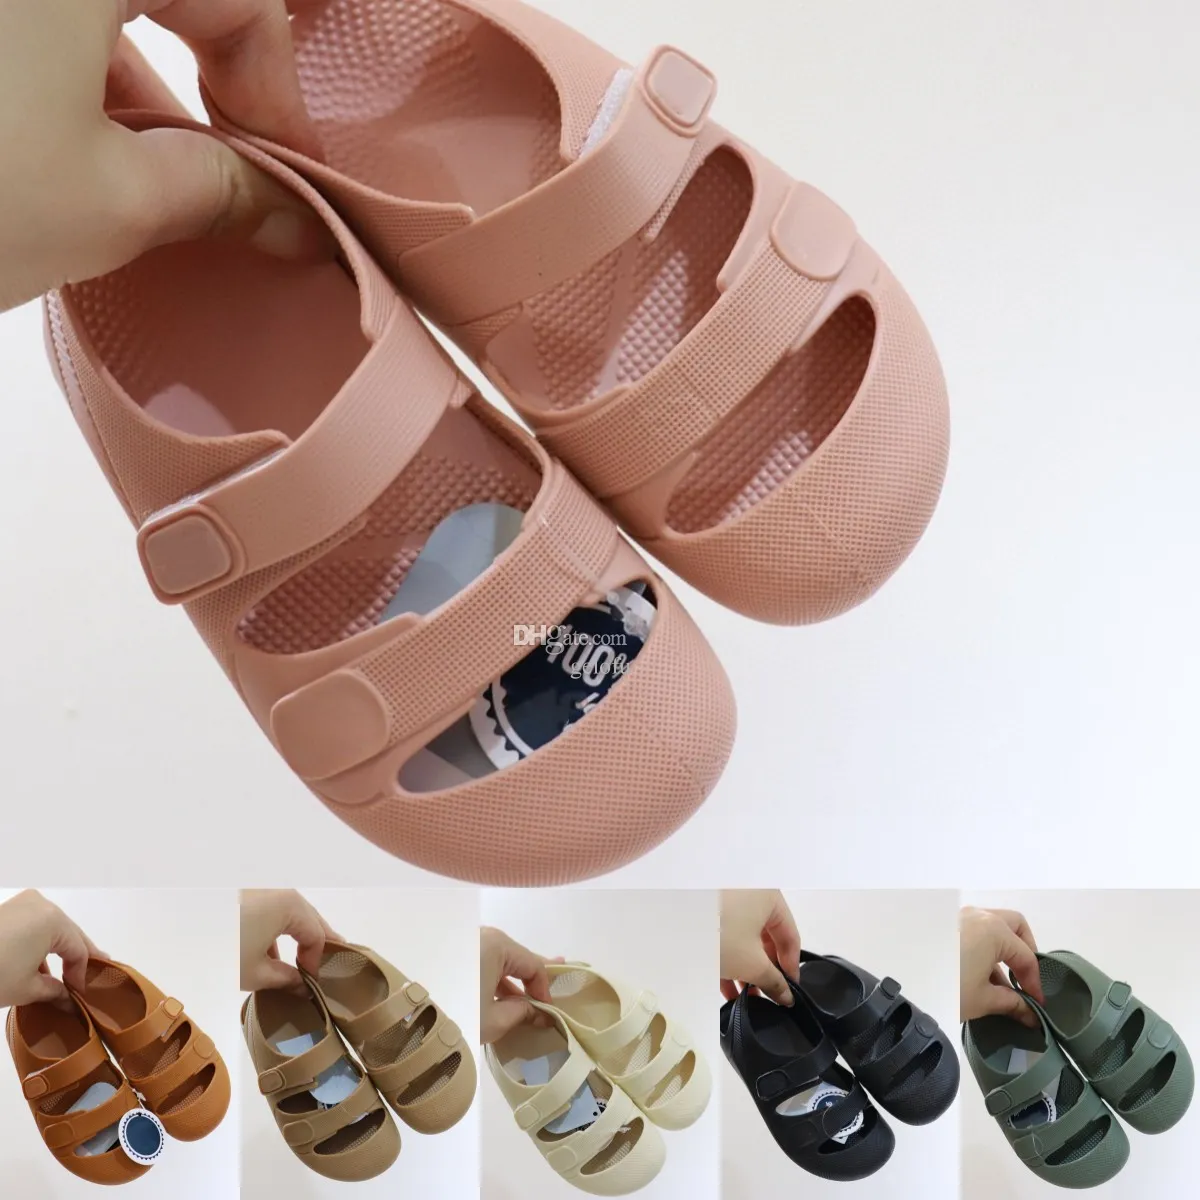 Kids Shoes Toe Sandals Classic igors Spain Brand Beach Outdoor Summer Children Slippers Flip Flop Casual Toddler Kid Sandal Boys Girls Youth Closed Soft Sol N2Ry#